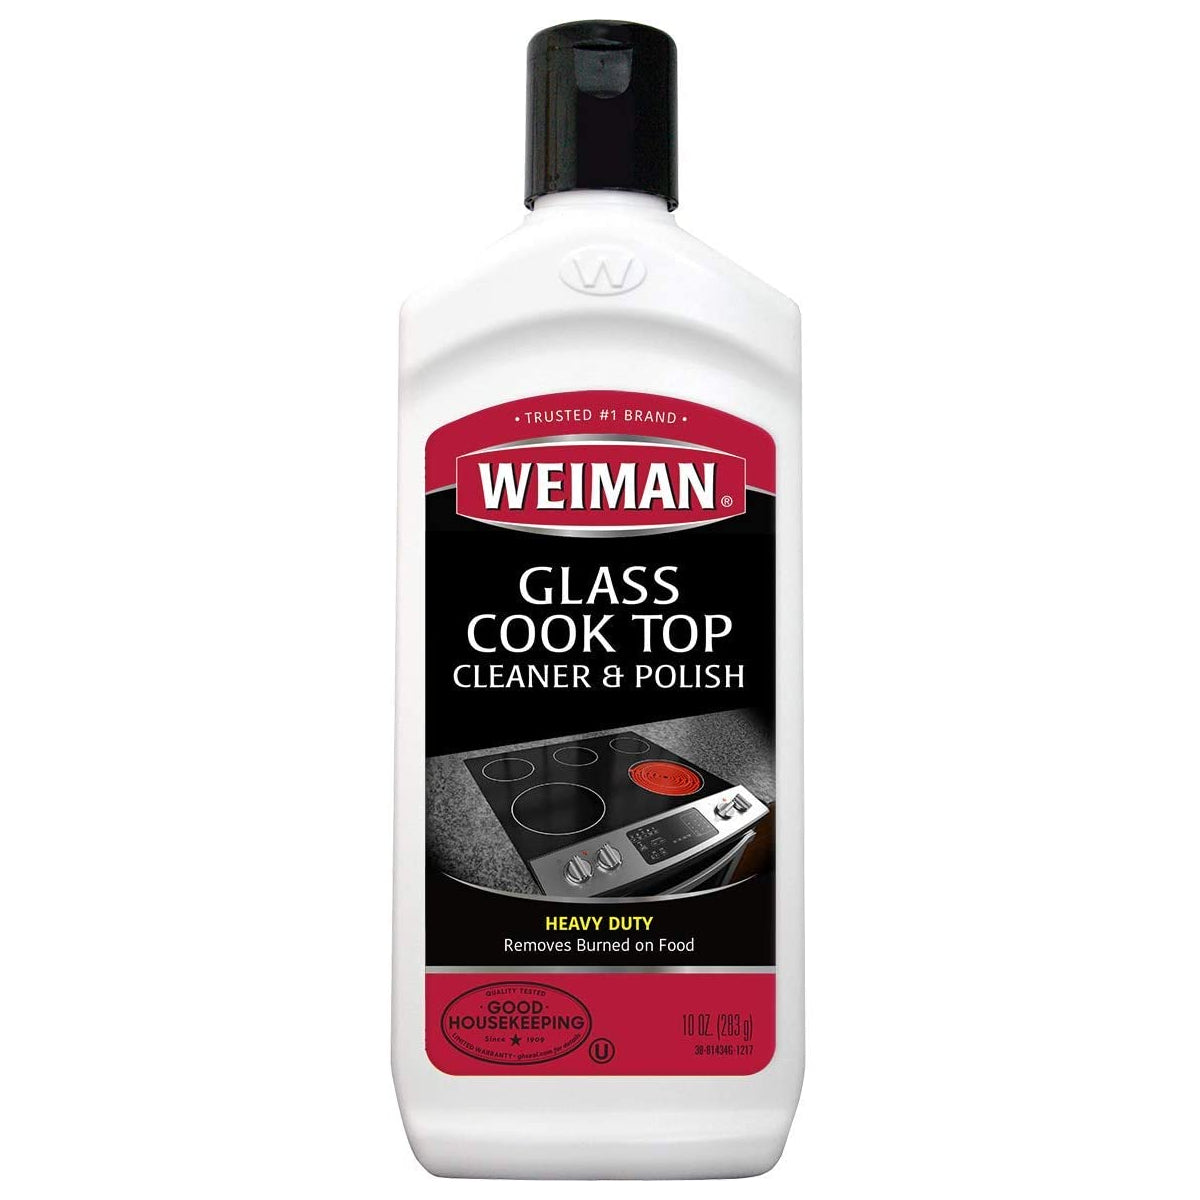 Weiman 38 Glass Cook Top Cleaner & Polish, 10 Oz